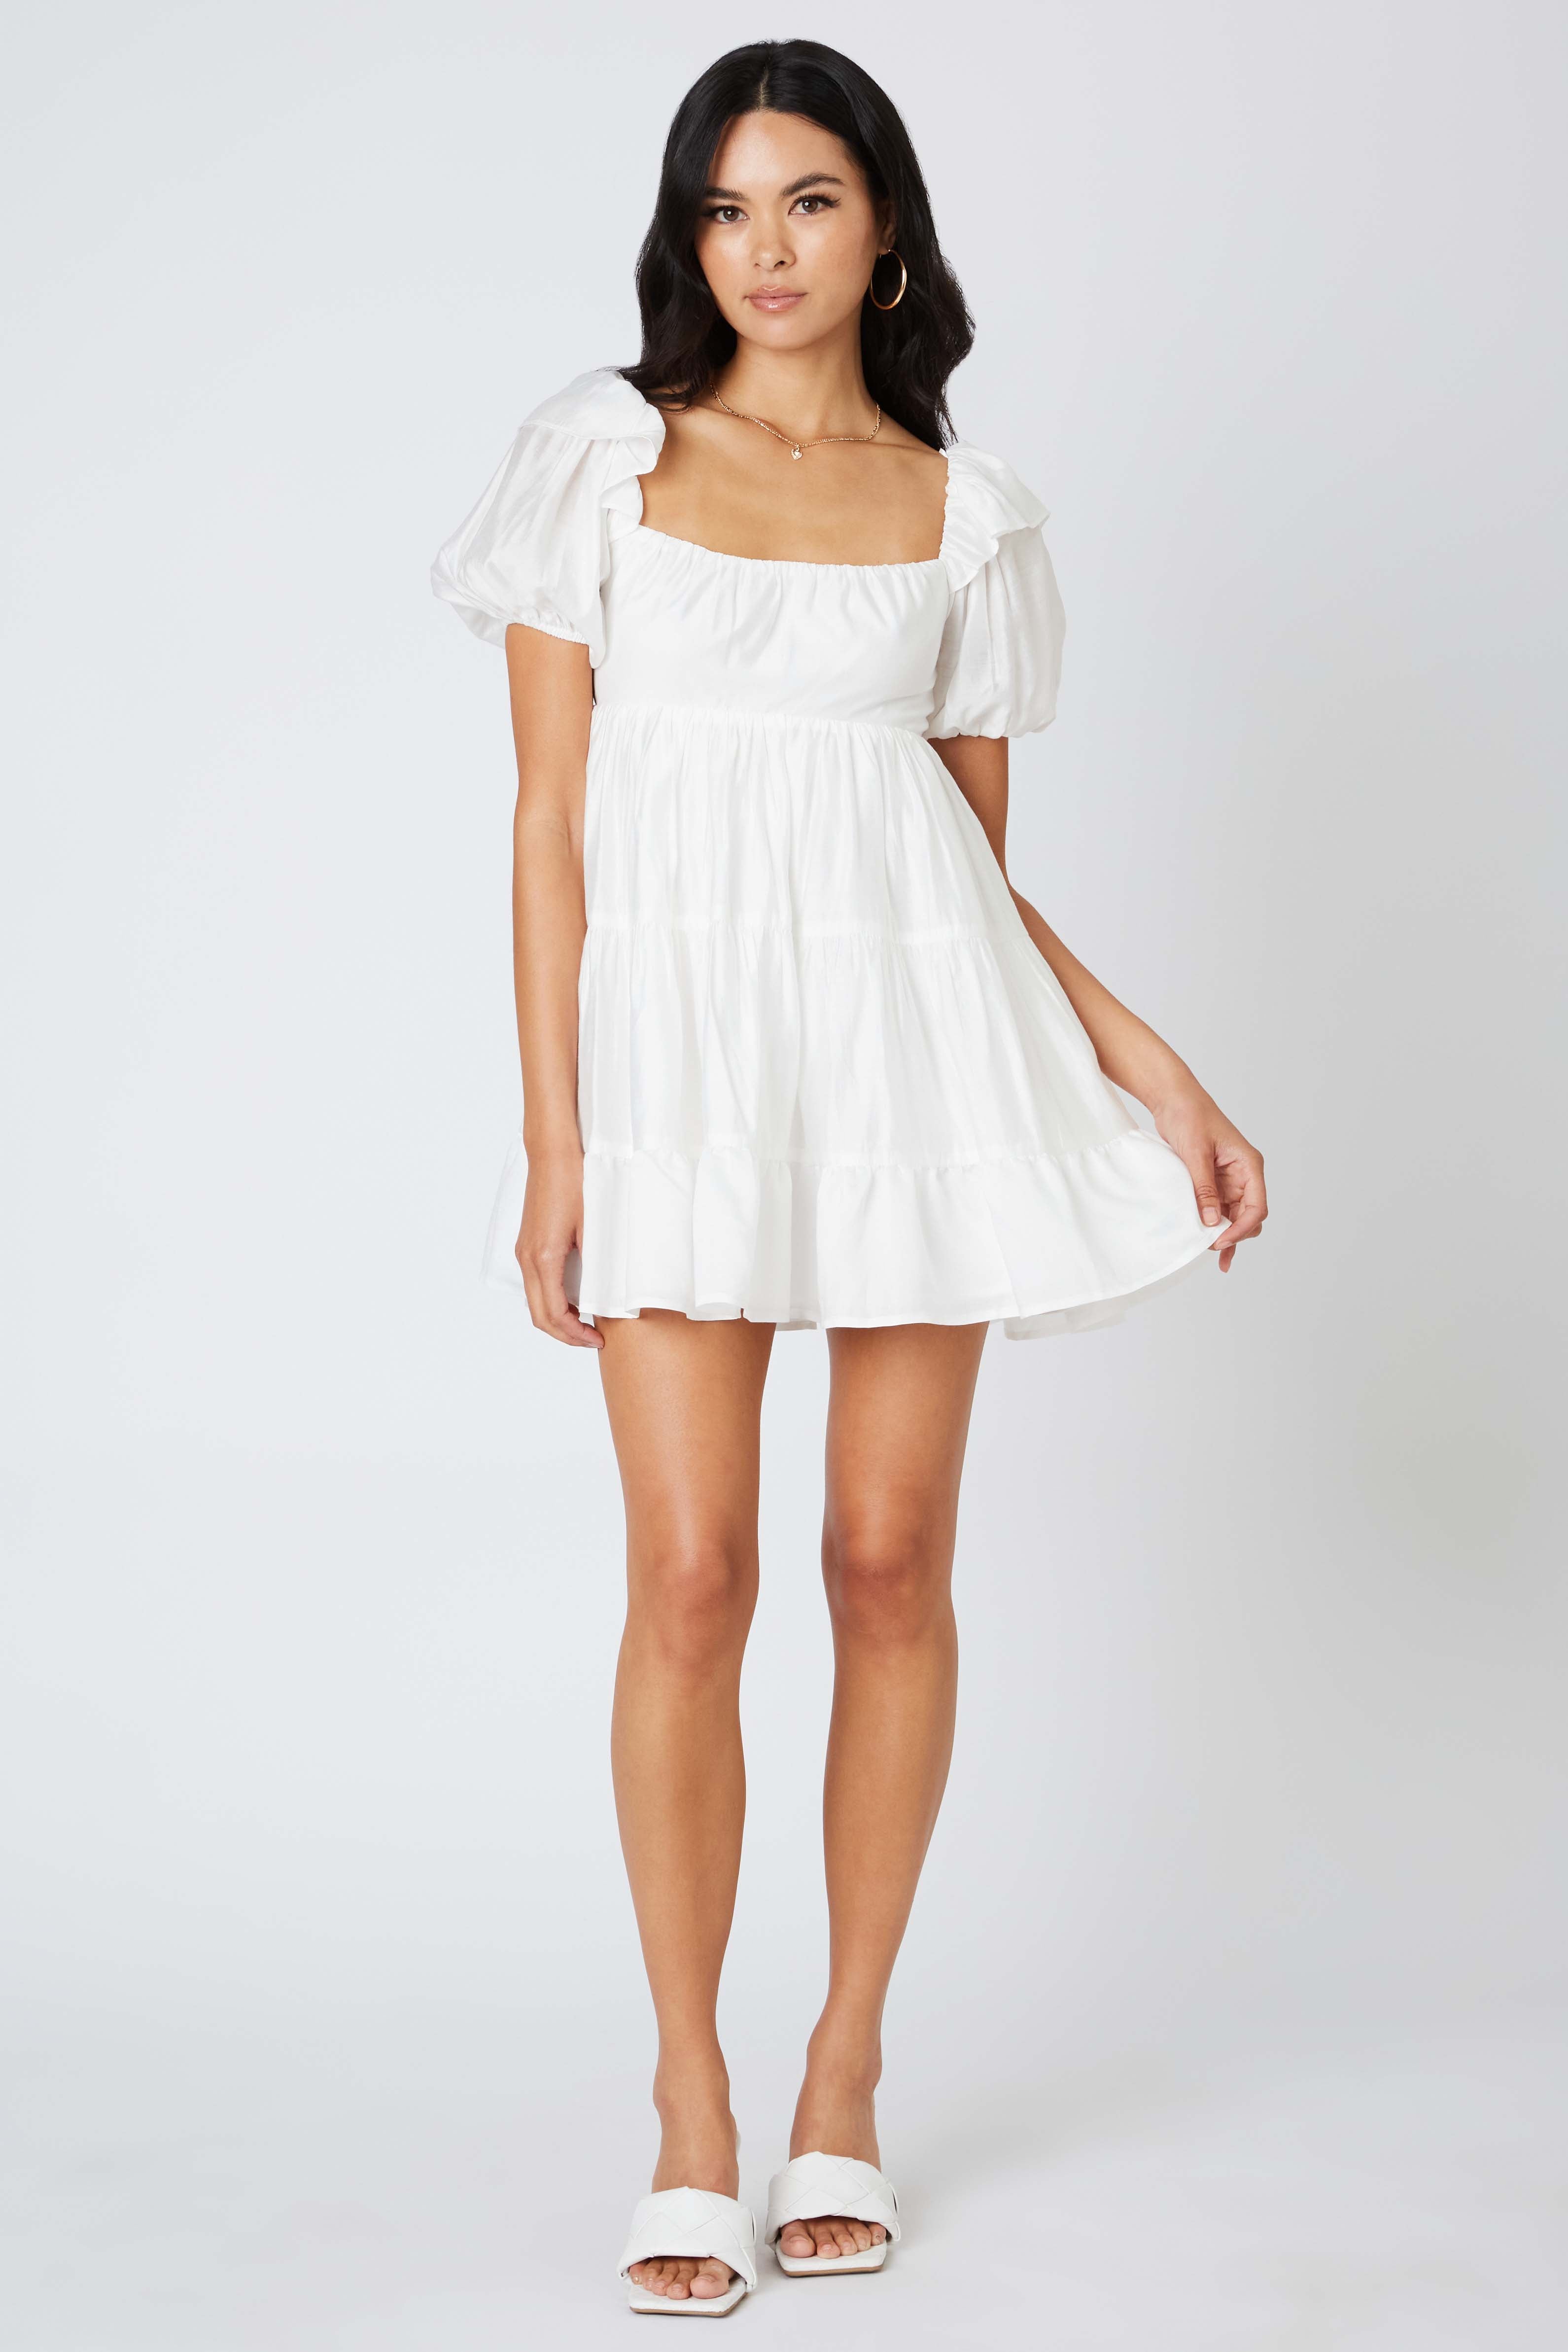 Puff Sleeve Babydoll Dress in White Front View